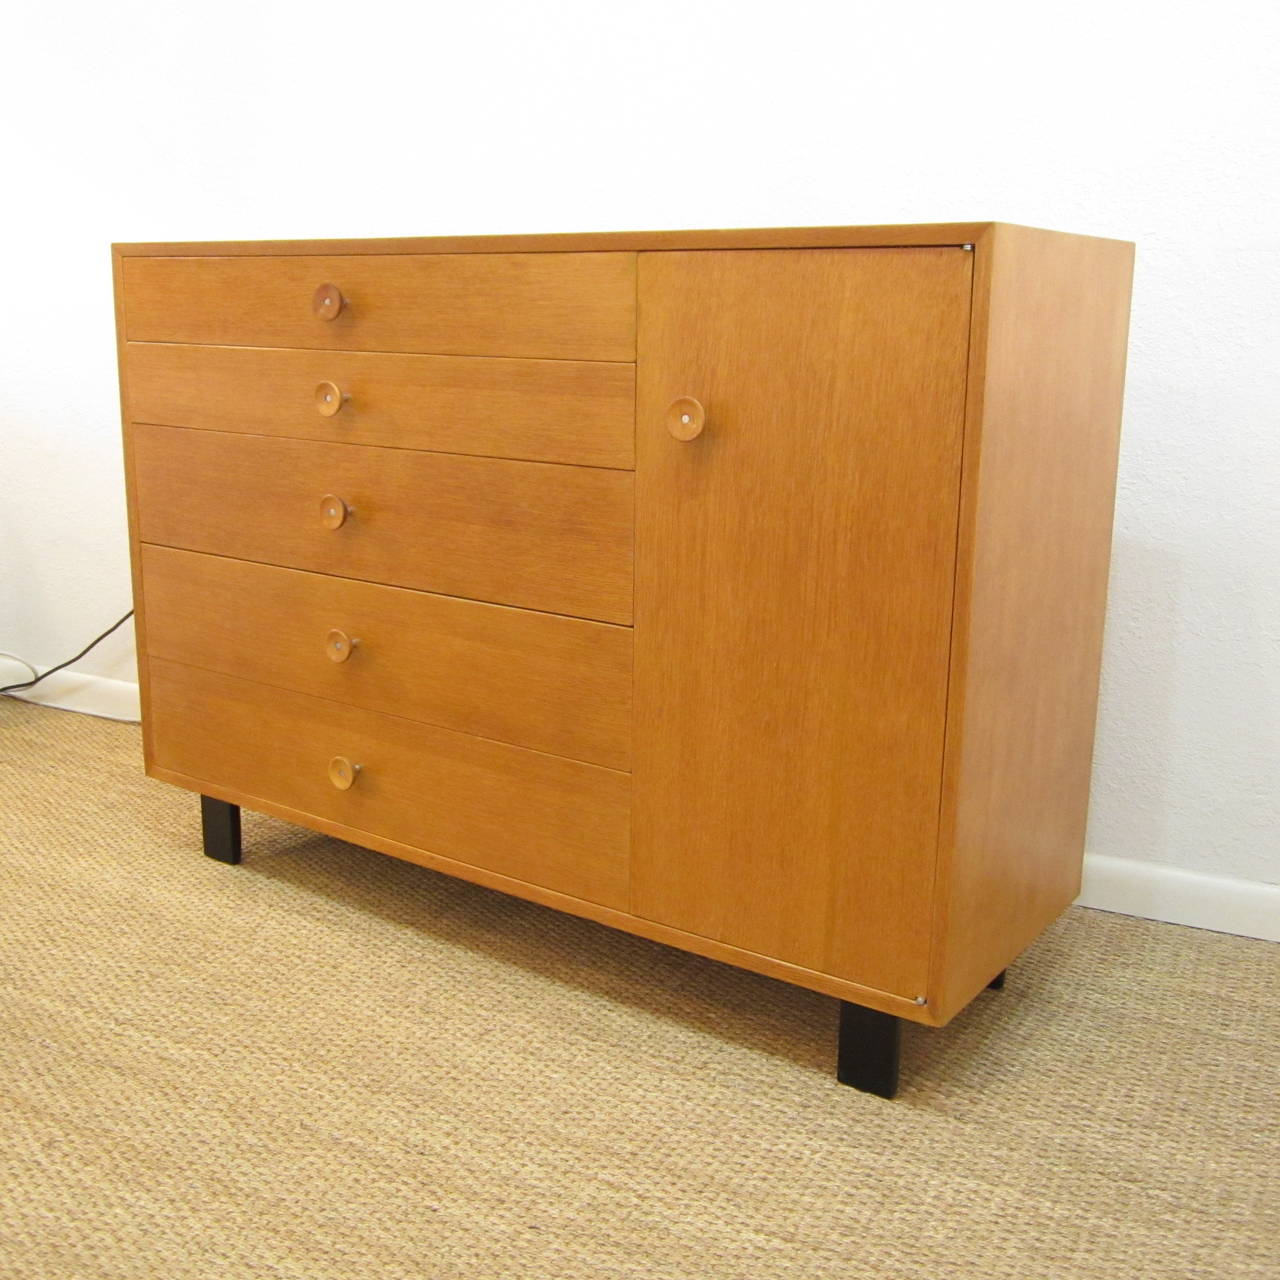 George Nelson for Herman Miller solid white oak cabinet featuring five drawers and single door, which reveals two adjustable shelves. Several drawers are compartmentalized and the top drawer retains the original Herman Miller/George Nelson signature